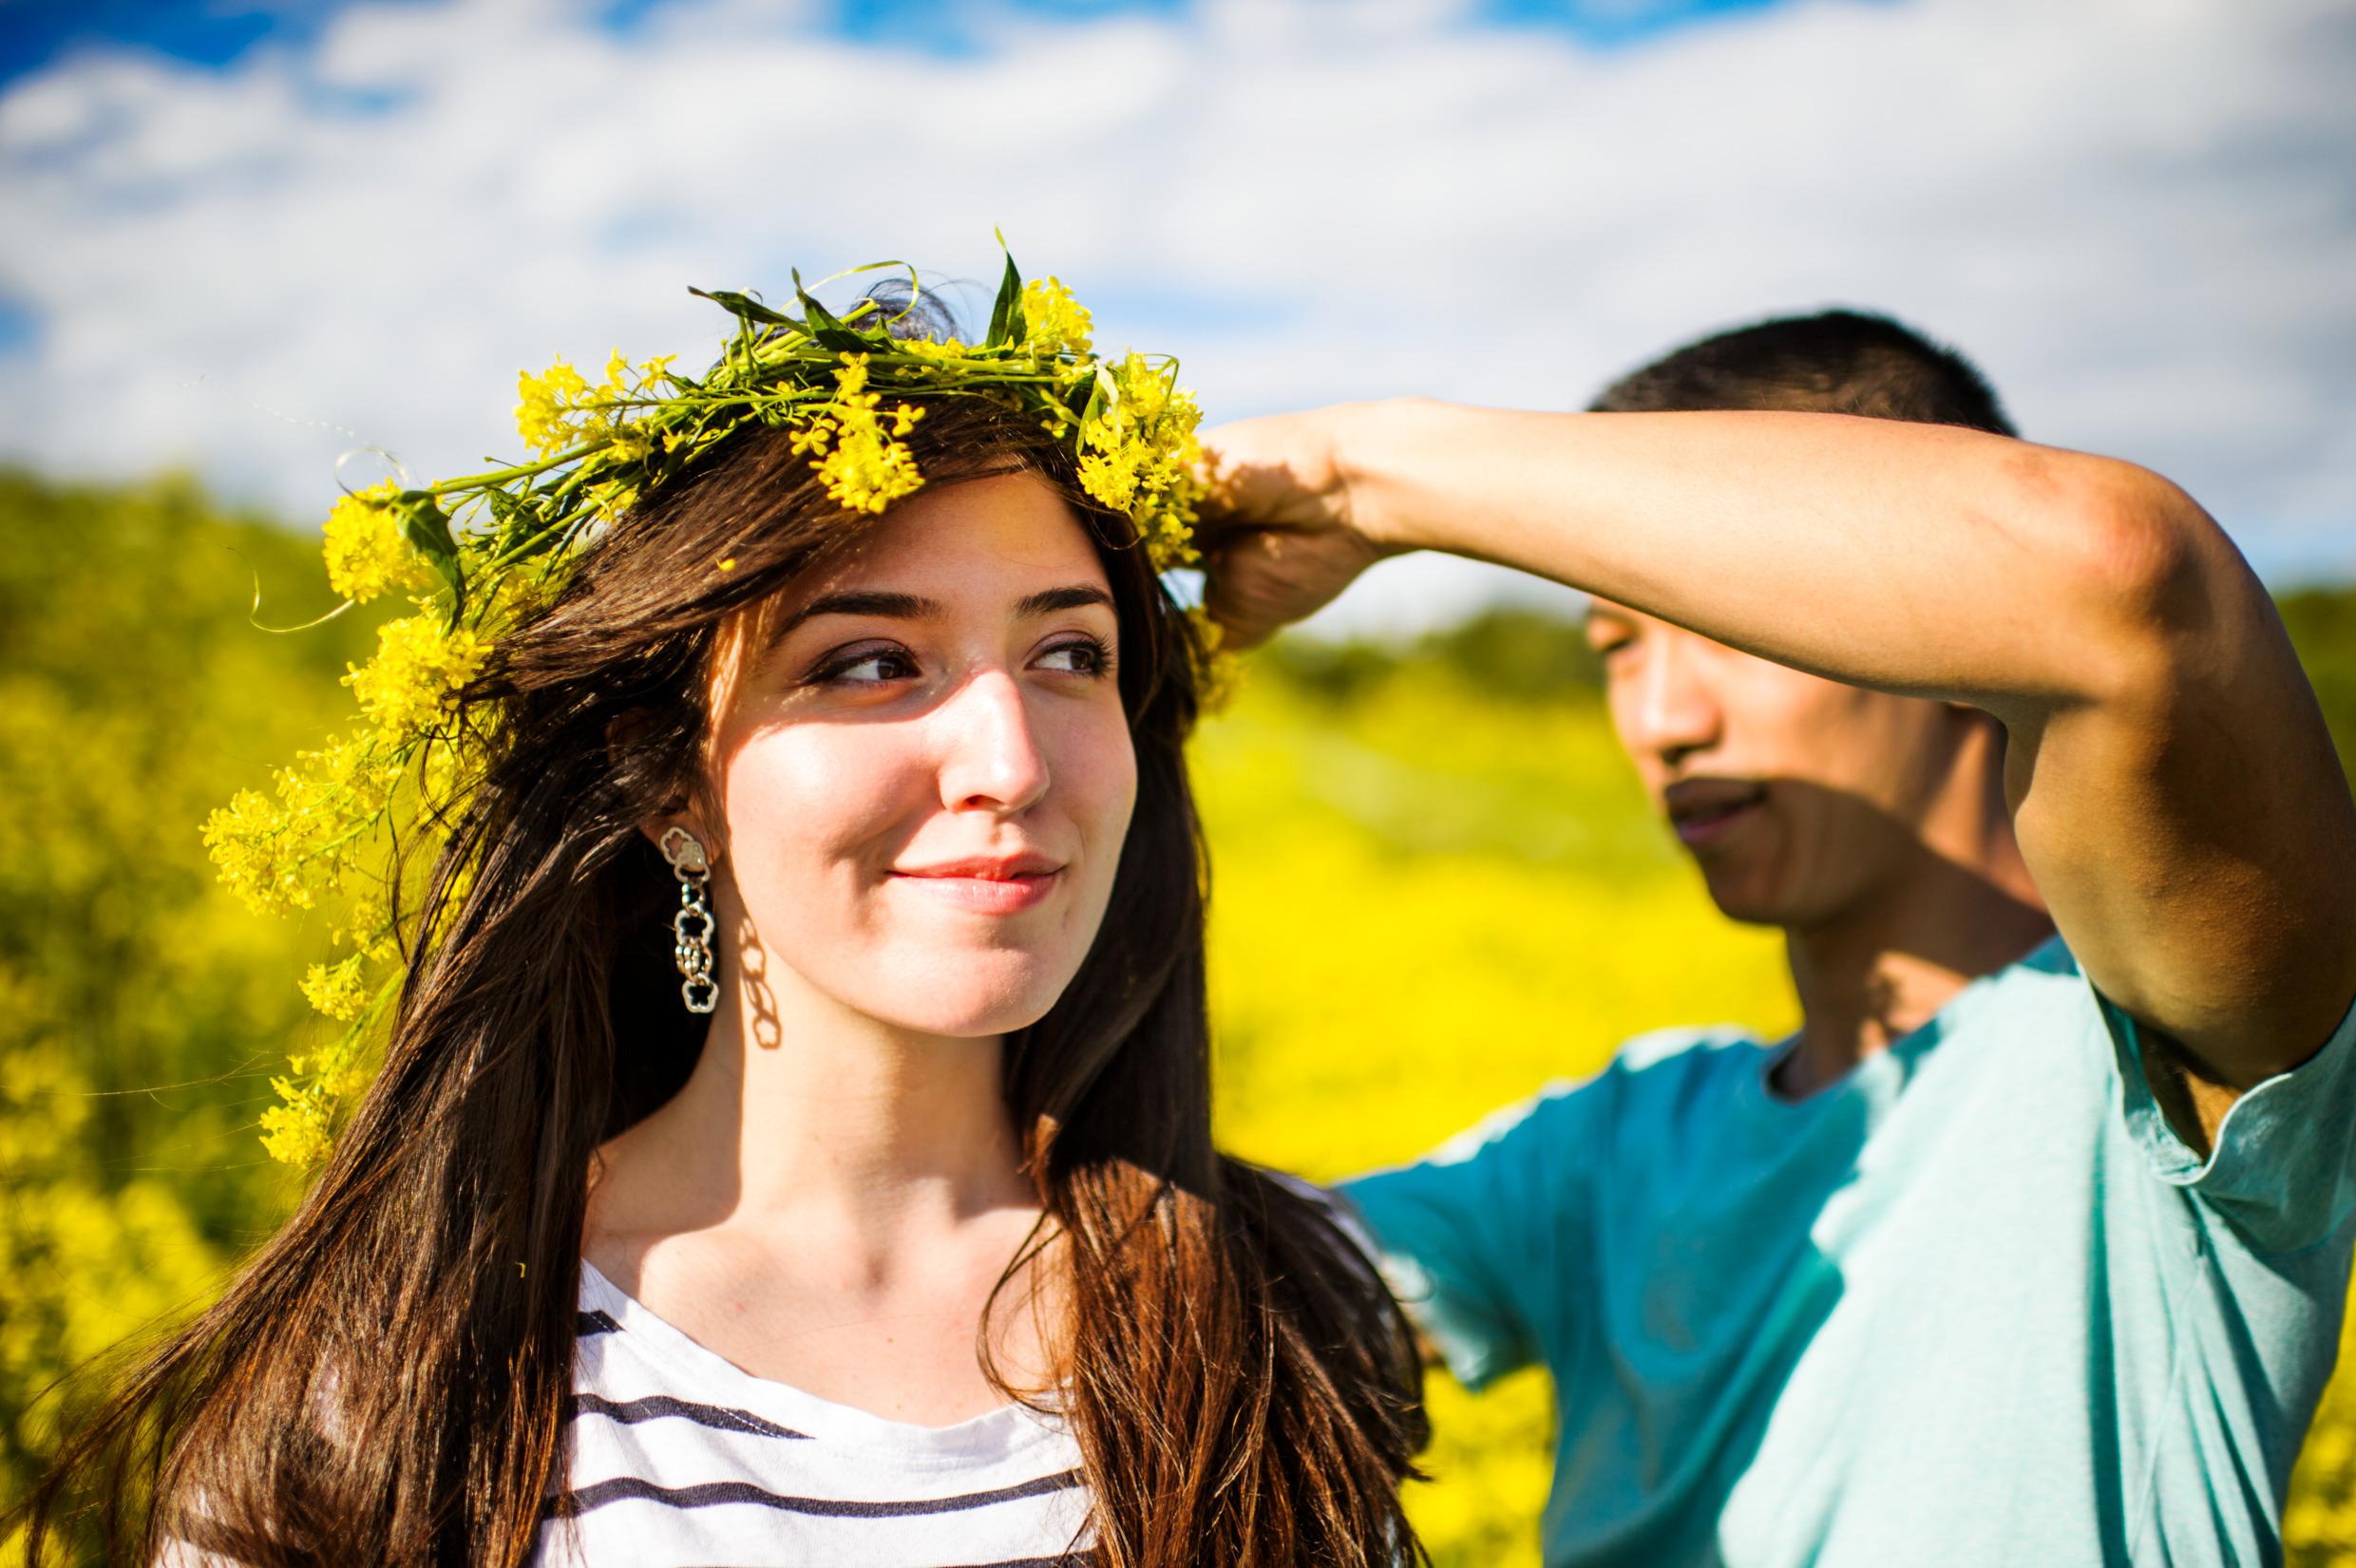 A man fitting a wreath of yellow flowers on a woman's head.